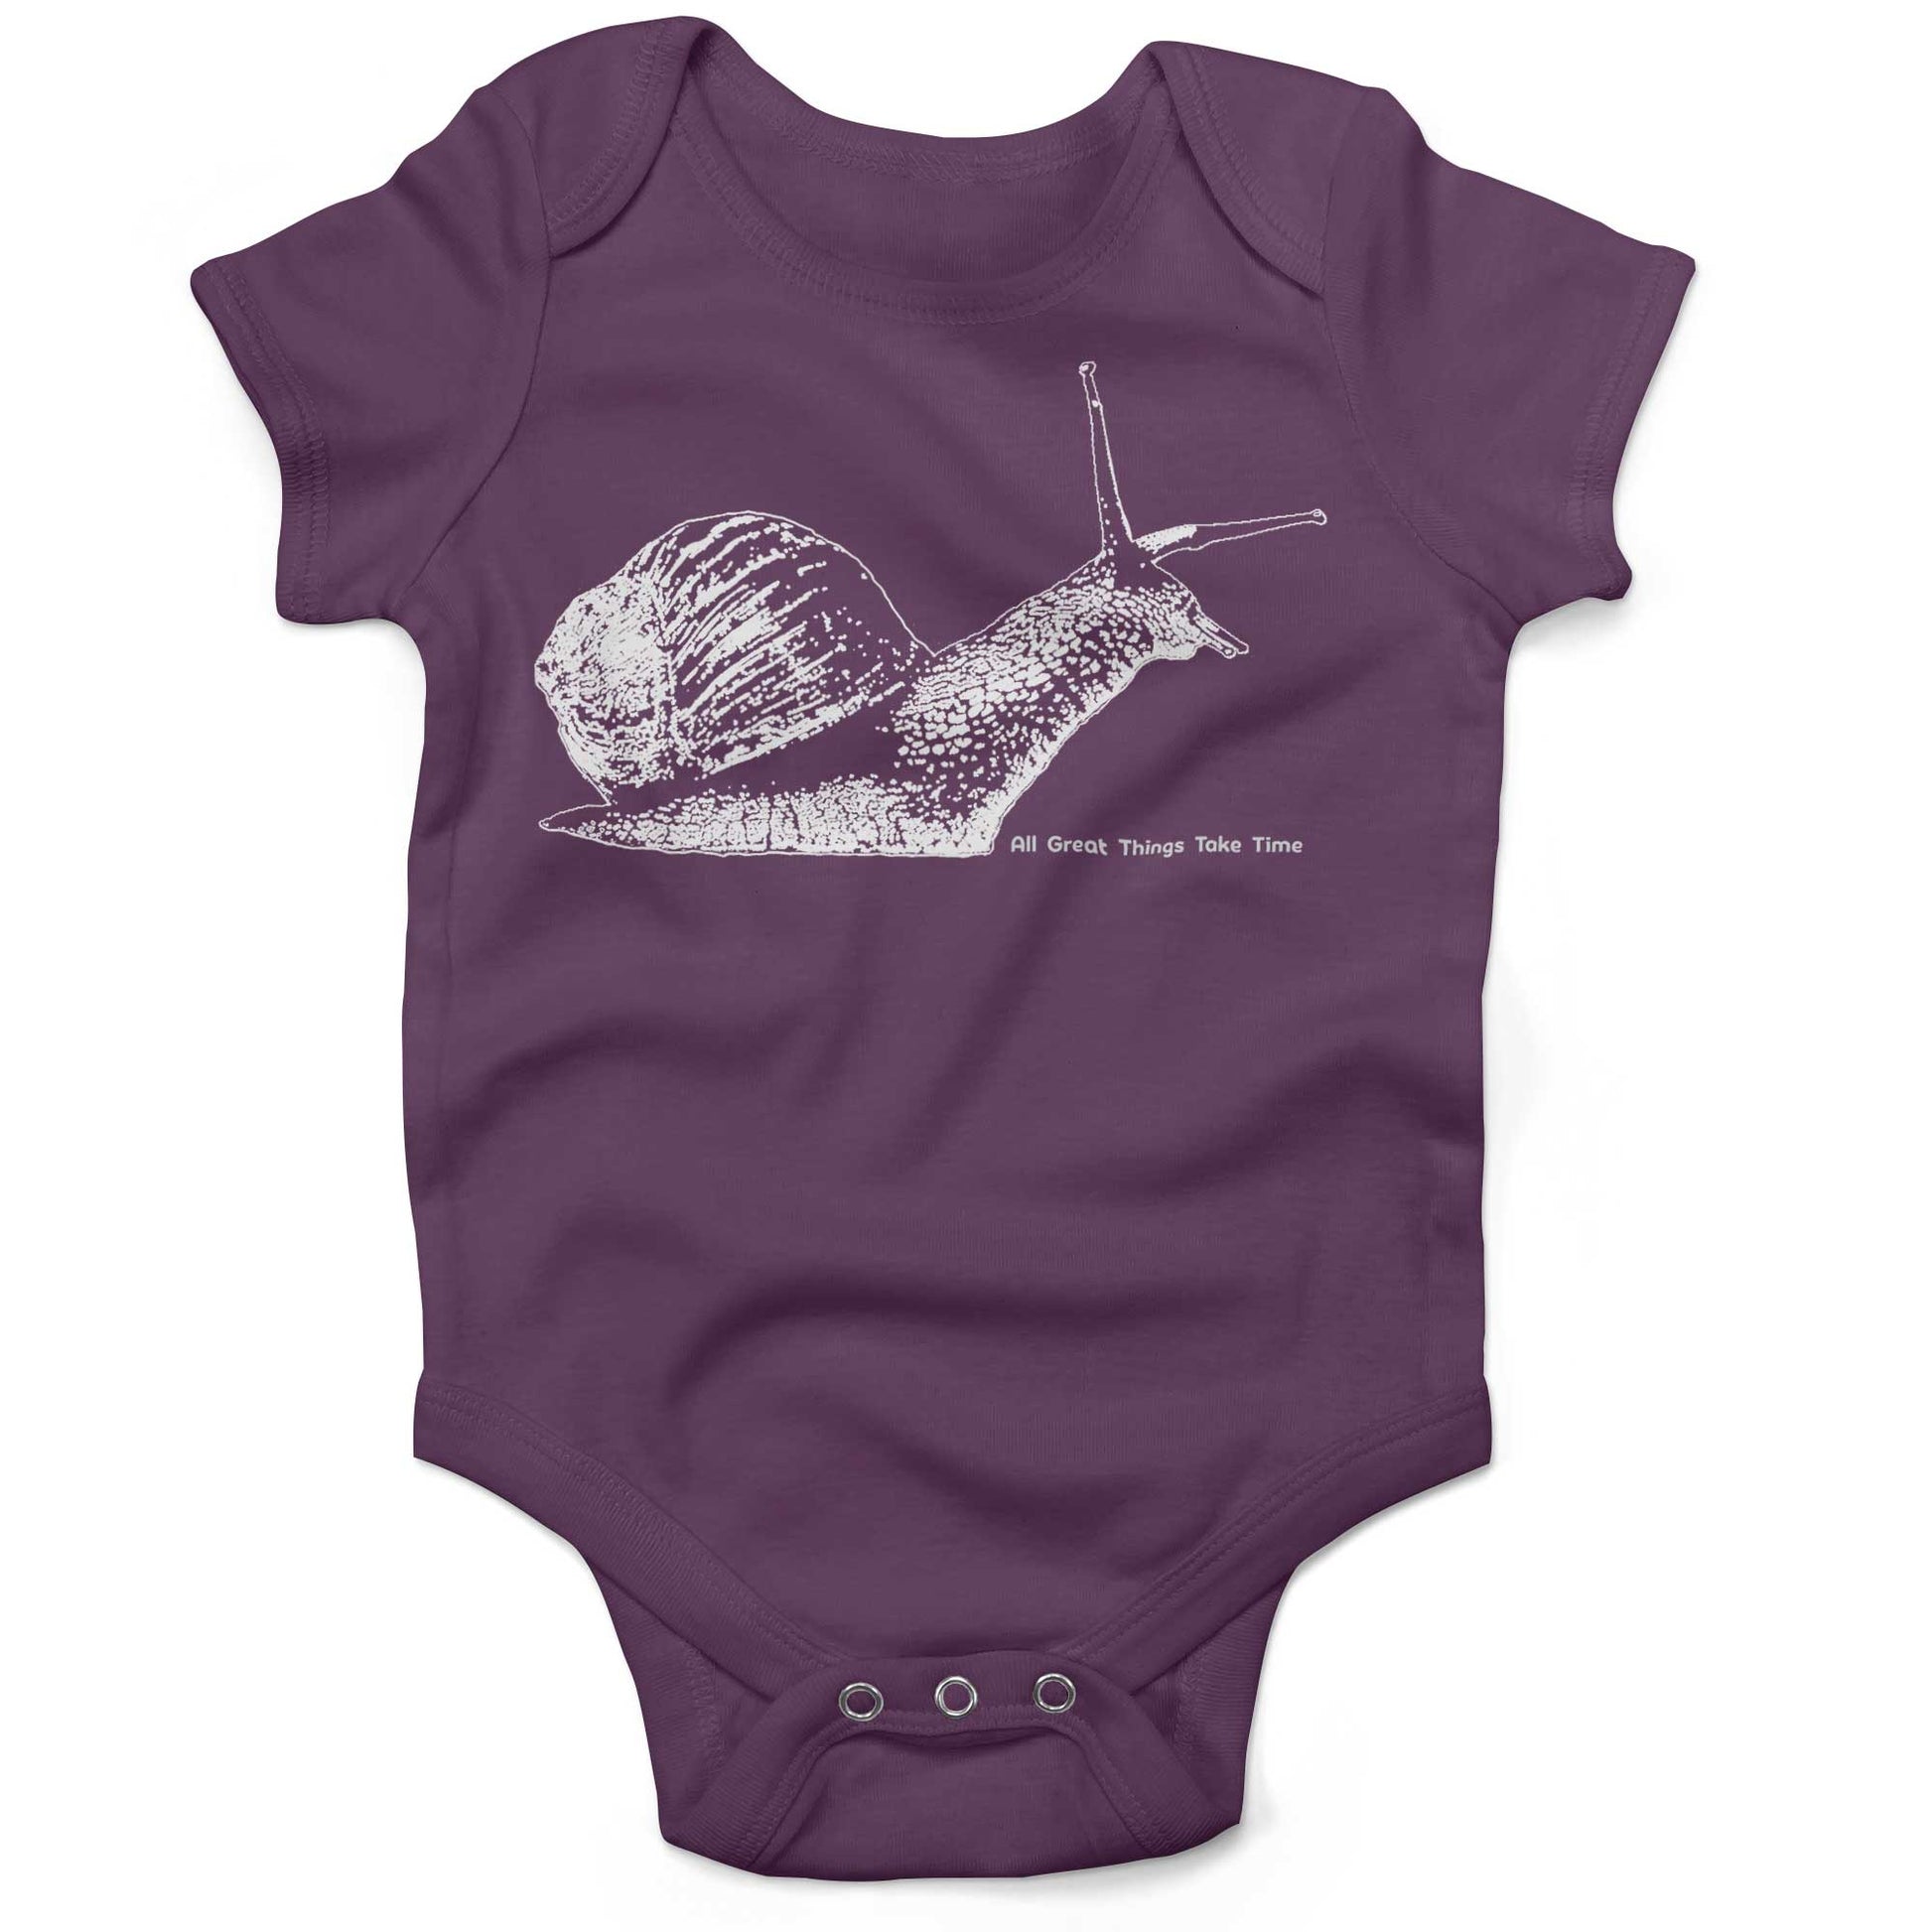 All Great Things Take Time Baby One Piece-Organic Purple-3-6 months